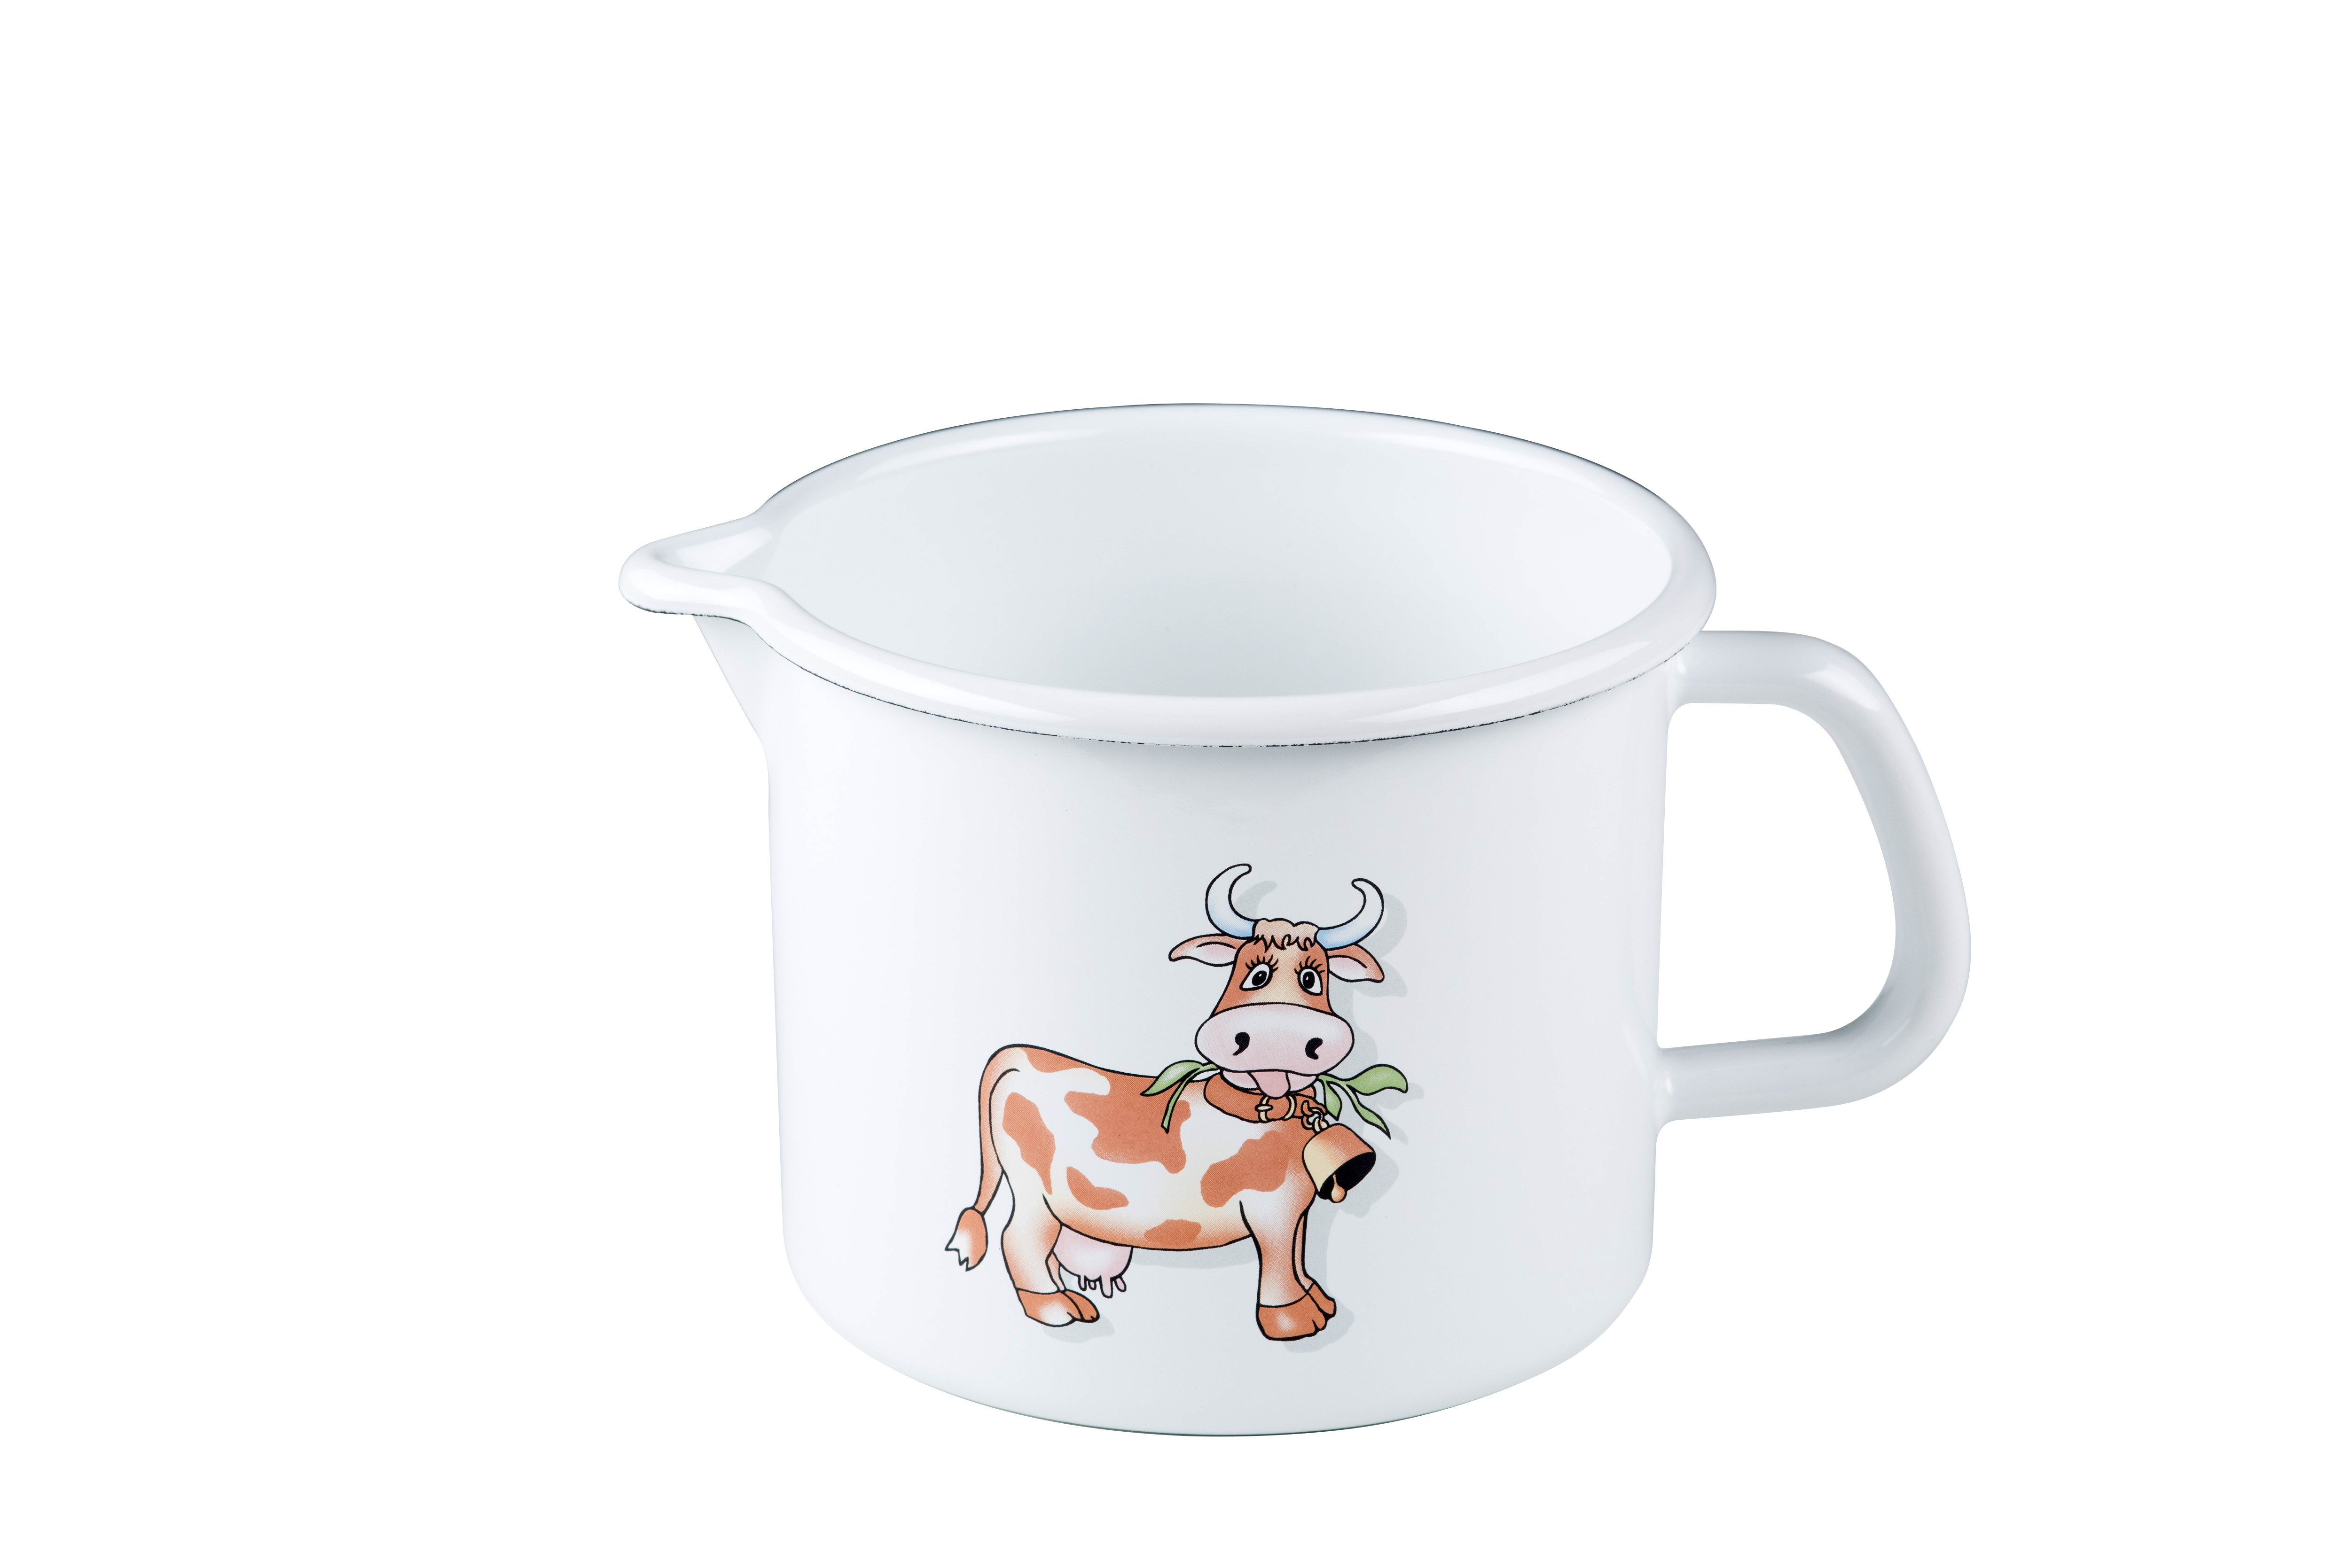 Riess Schnabeltopf Milchtopf  Becher Emaille Email Emaile Topf 10cm 0,75l Herd 